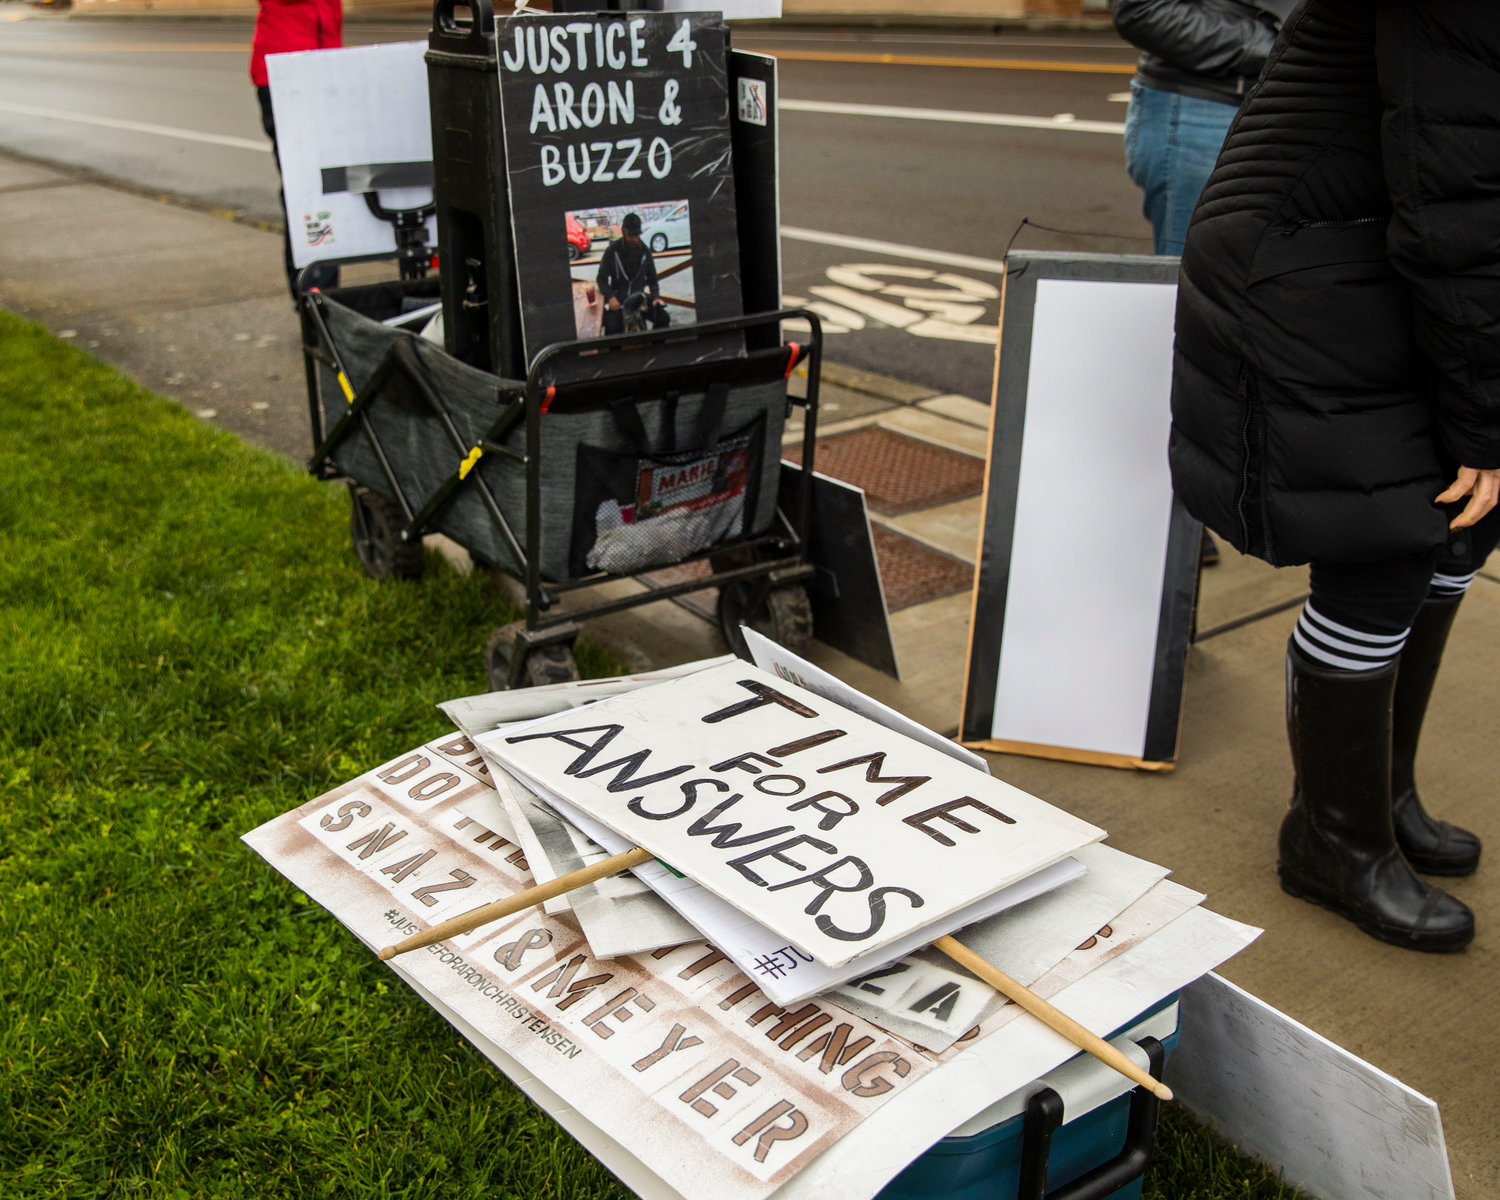 A sign reads “Time for answers,” as protesters stand outside the Lewis County Courthouse in Chehalis on Sunday demanding justice for Aron Christensen and his dog Buzzo.